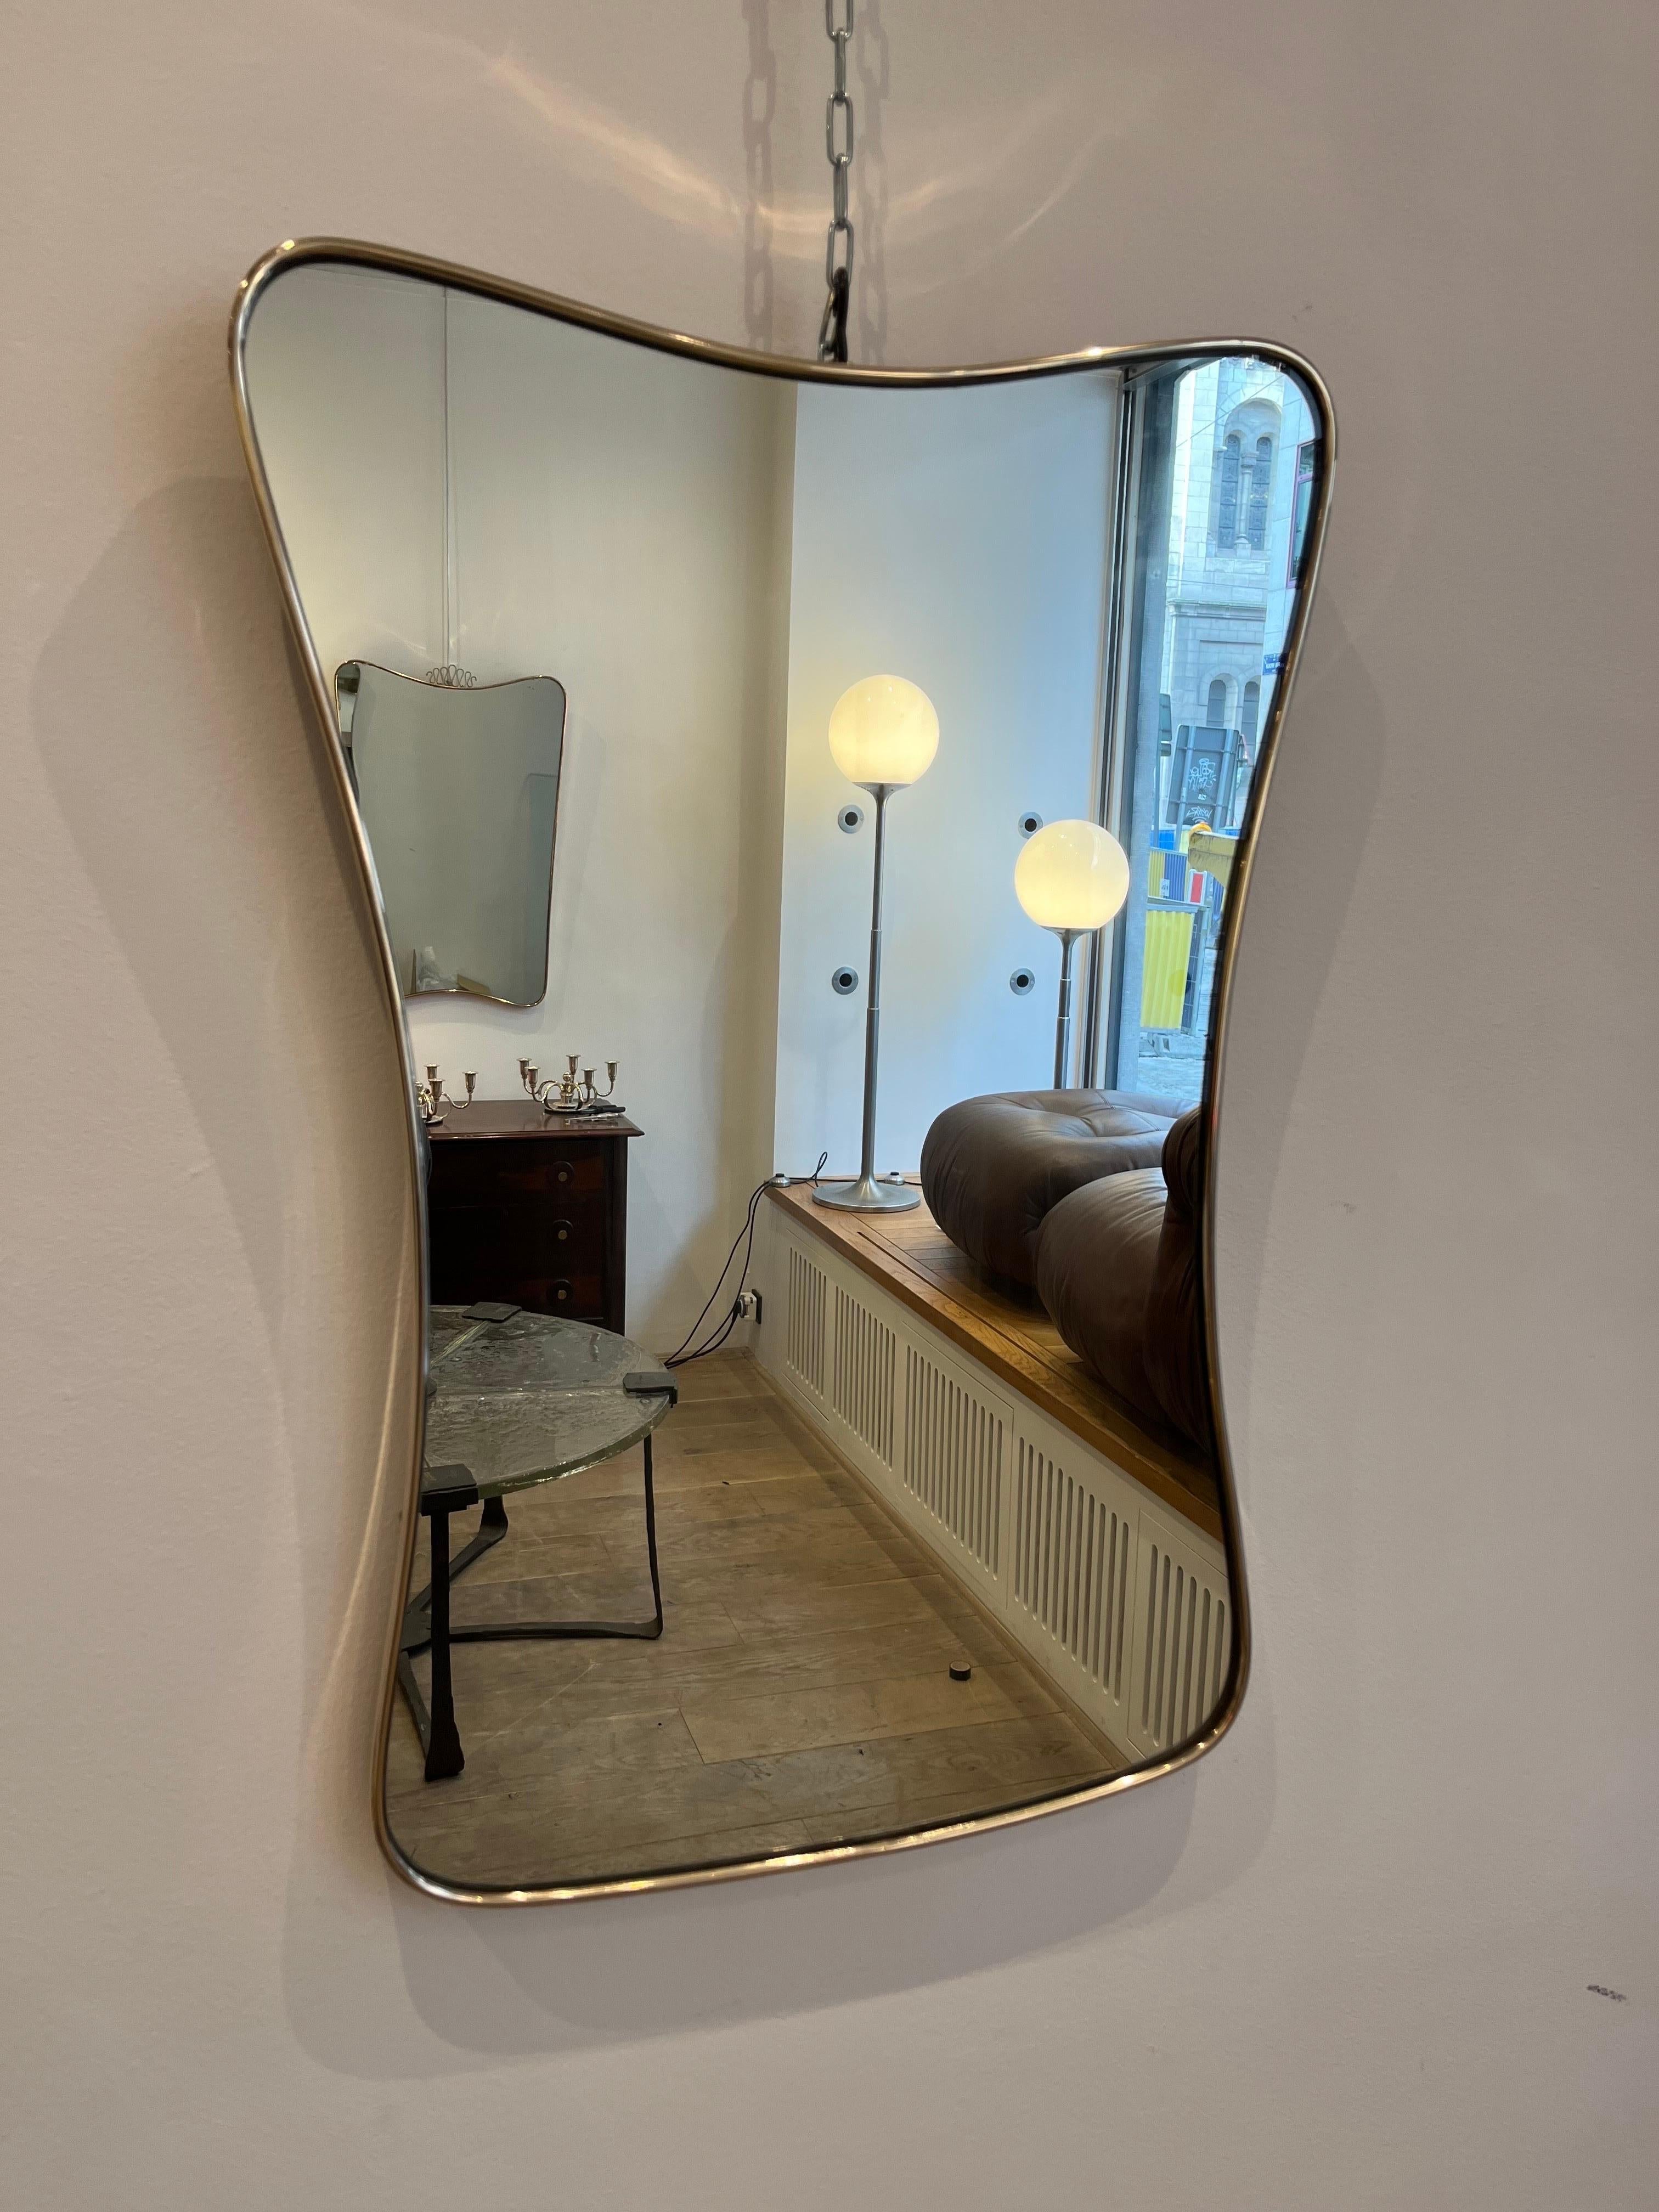 Elegant Italian brass mirror in the shape of a stylised diabolo. The mirror dates from the 1950-60s. It is clearly in the style of mirrors that Gio Ponti, the most celebrated Italian architect&designer, designed during that period. The brass has